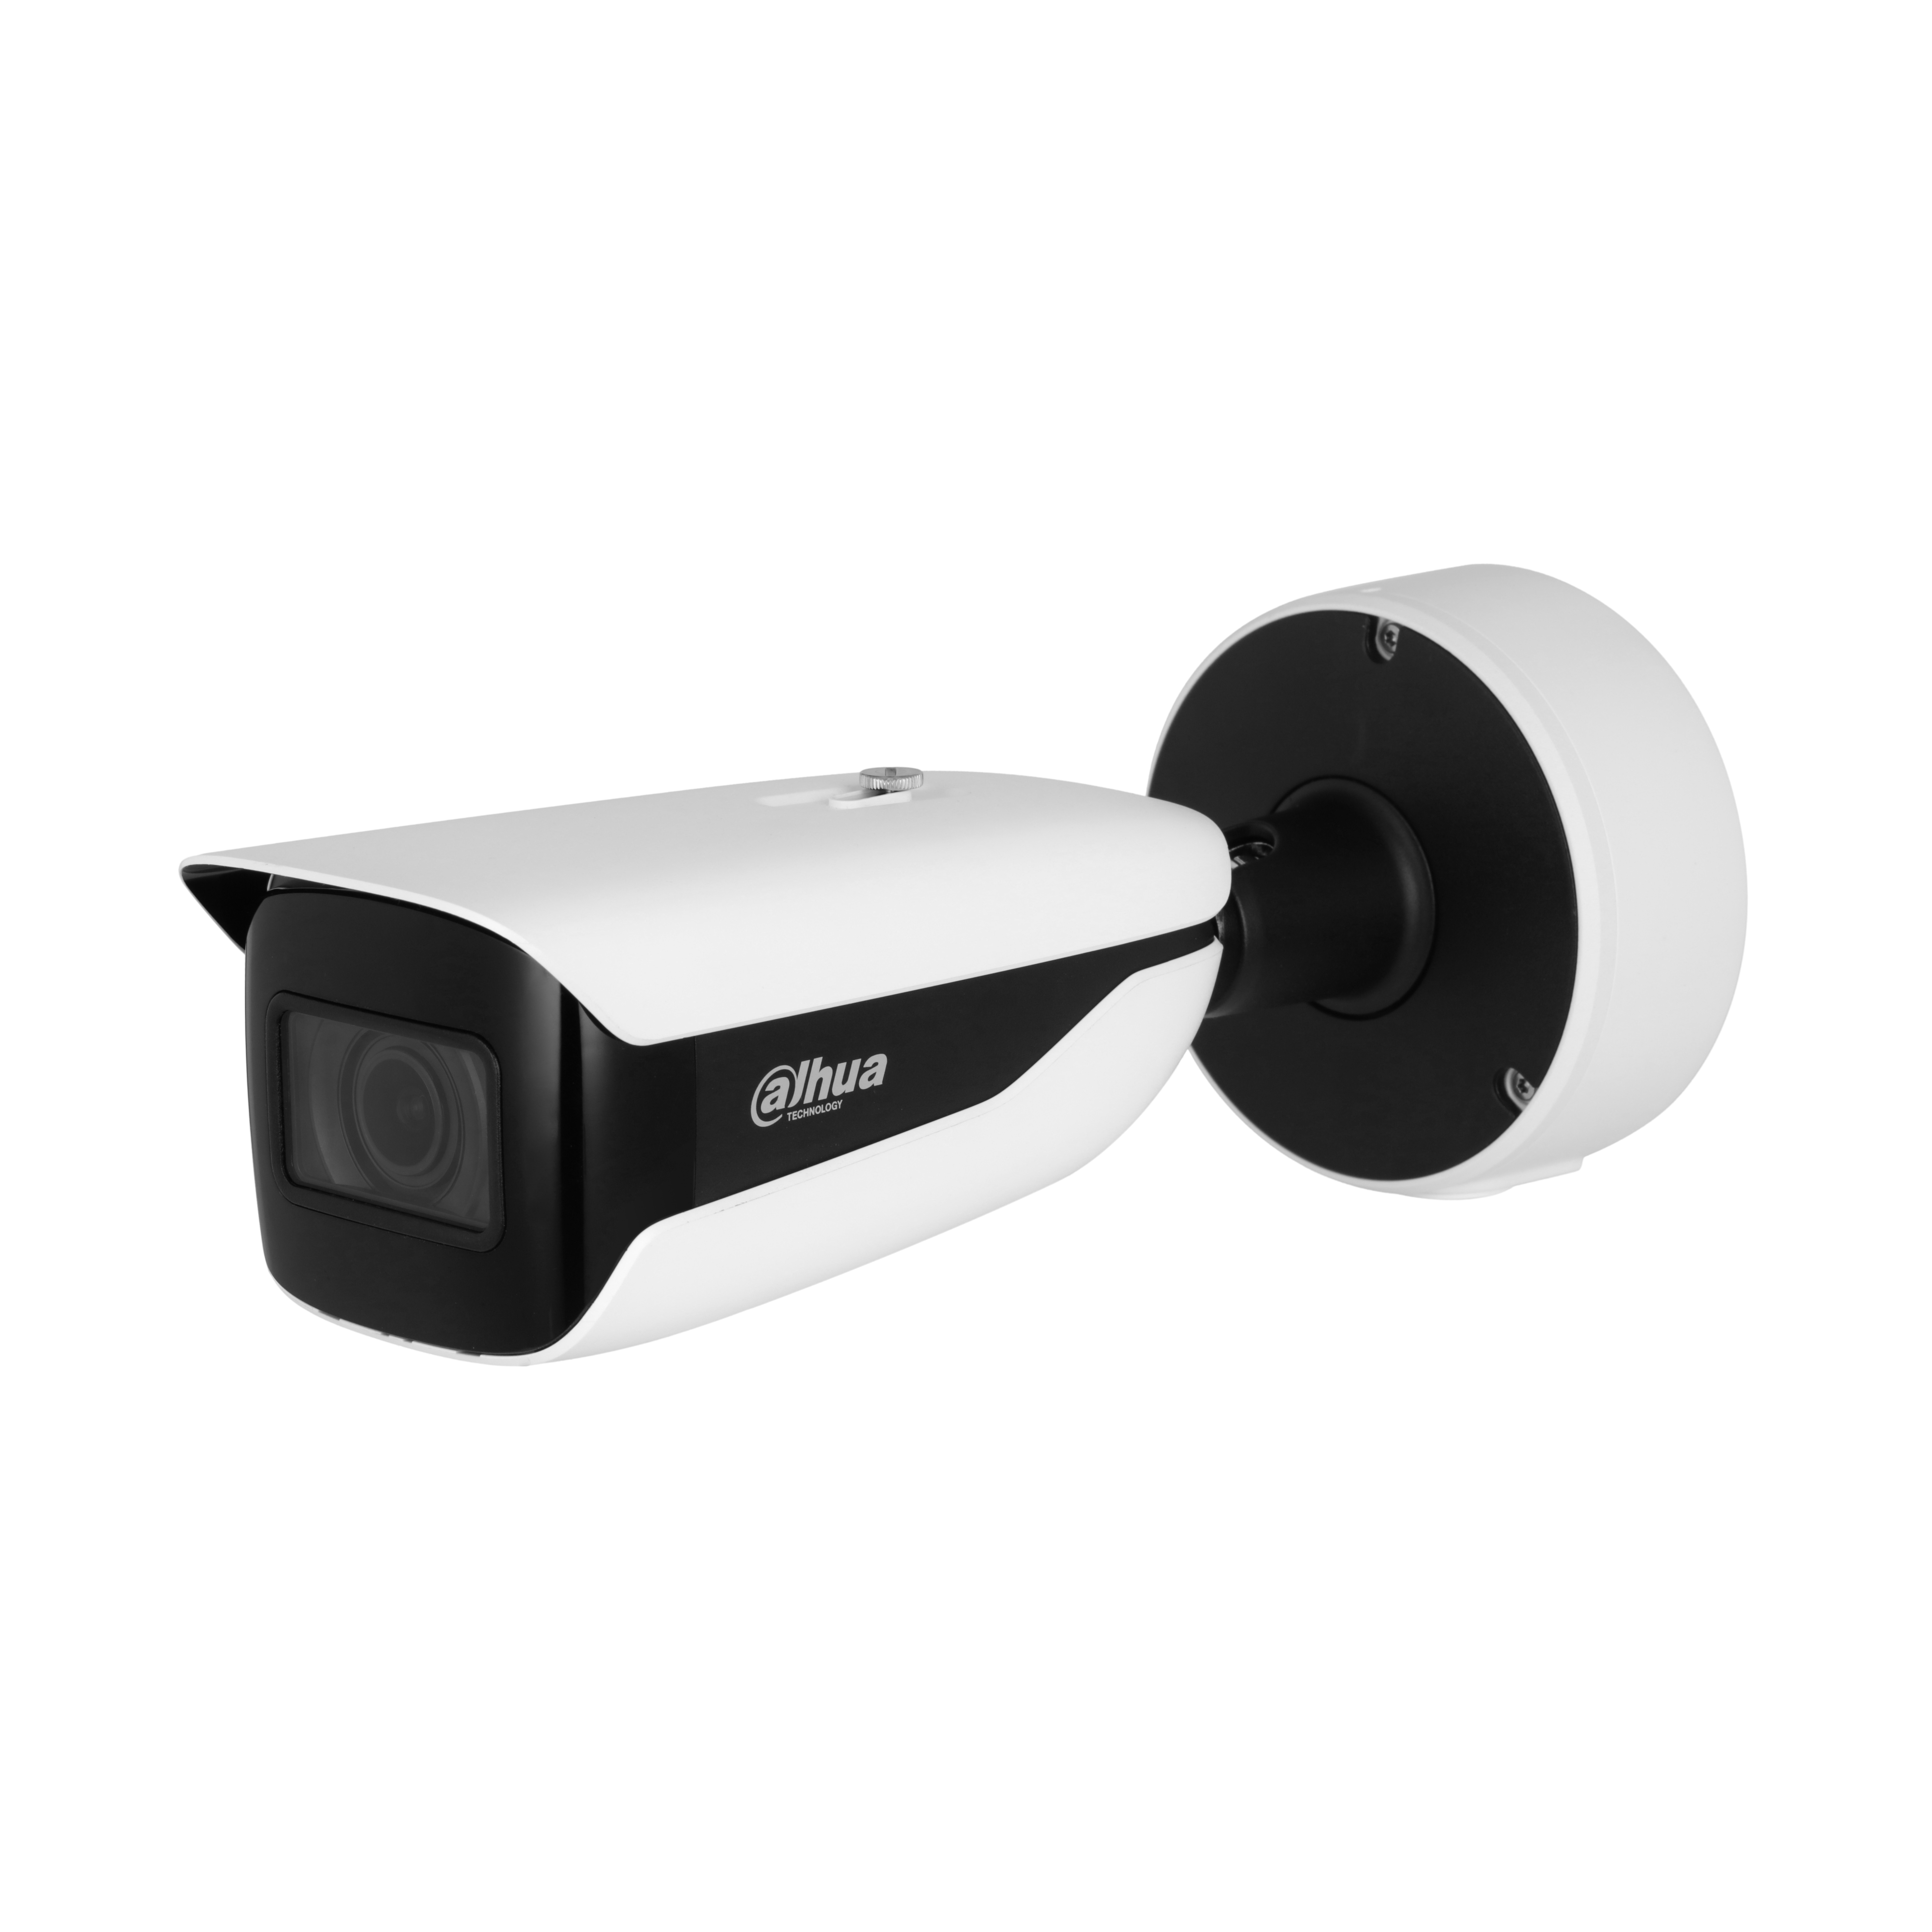 WIZMIND X SERIES IP CAMERA WHITE AI ANPR/ LPR & PEOPLE COUNT 12MP H.264/4+/5/5+ BULLET DIGITAL WDR PLASTIC/METAL 2.7-12MM MOTORISED LENS 4X ZOOM DEEP LIGHT IR 60M POE+/ EPOE IP67 WITHOUT MIC AUDIO IN AUDIO OUT 3 x ALARM IN 2 x ALARM OUT SUPPORT UP TO 512GB SDIK10 12VDC/24VAC CVBS OUTPUT